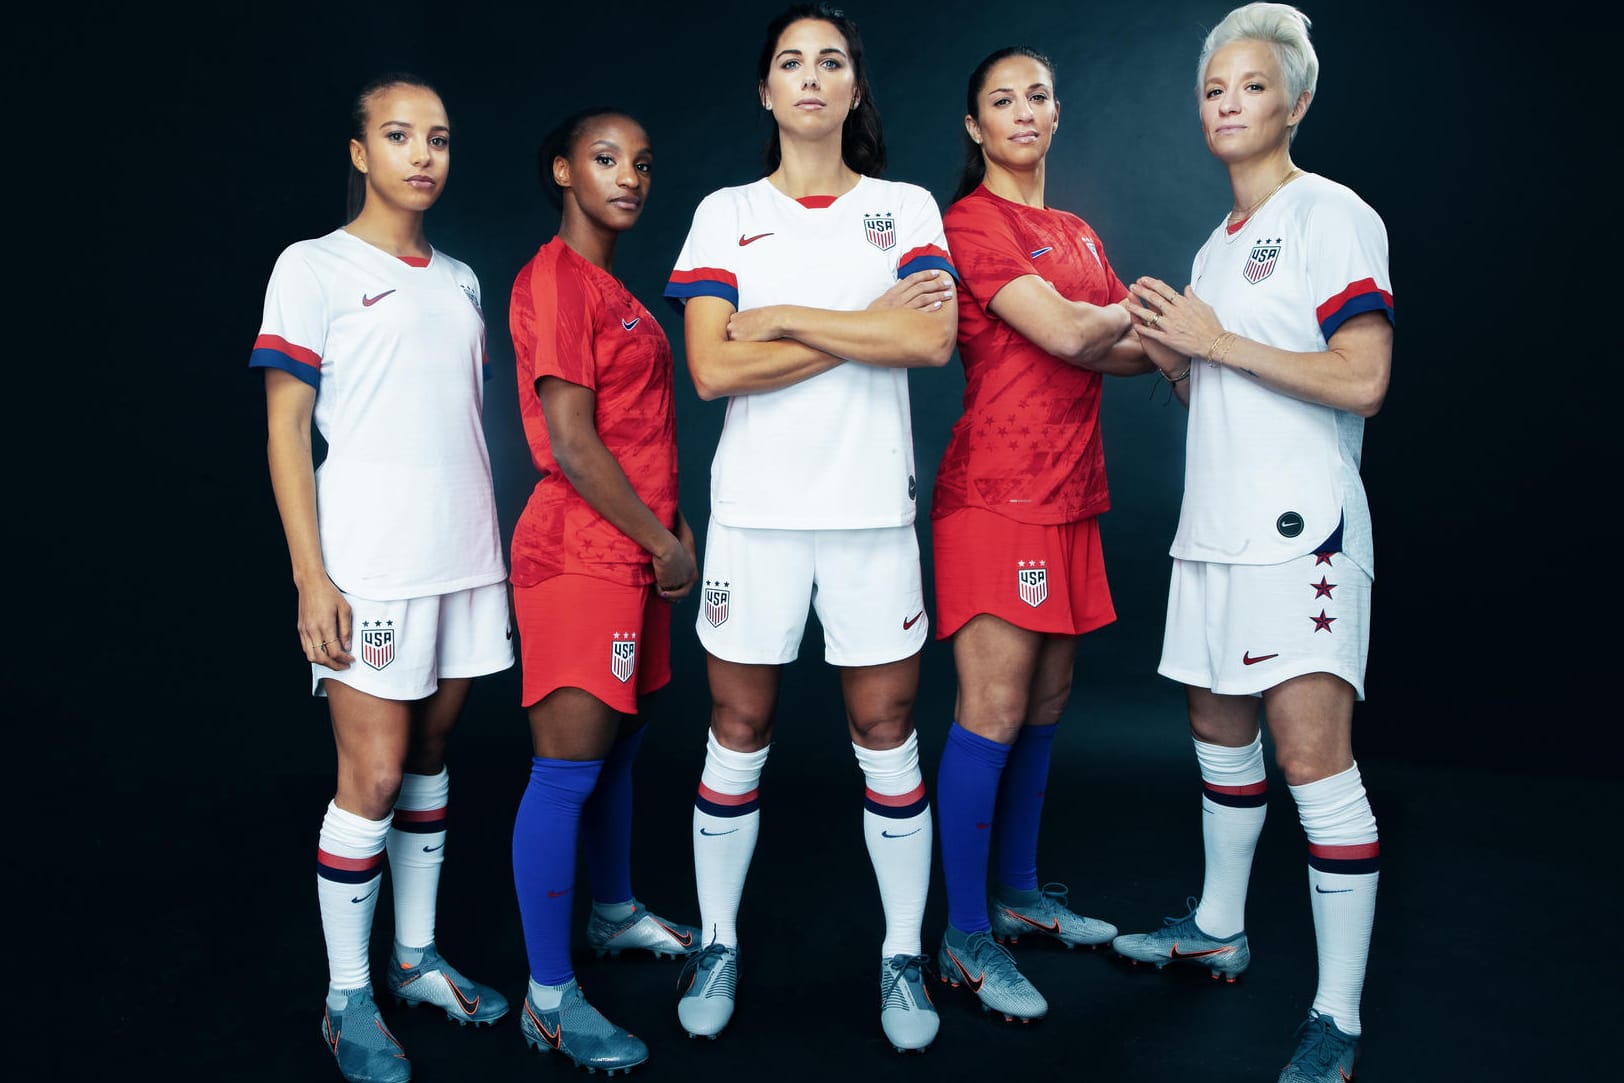 nike women's world cup commercial 2019